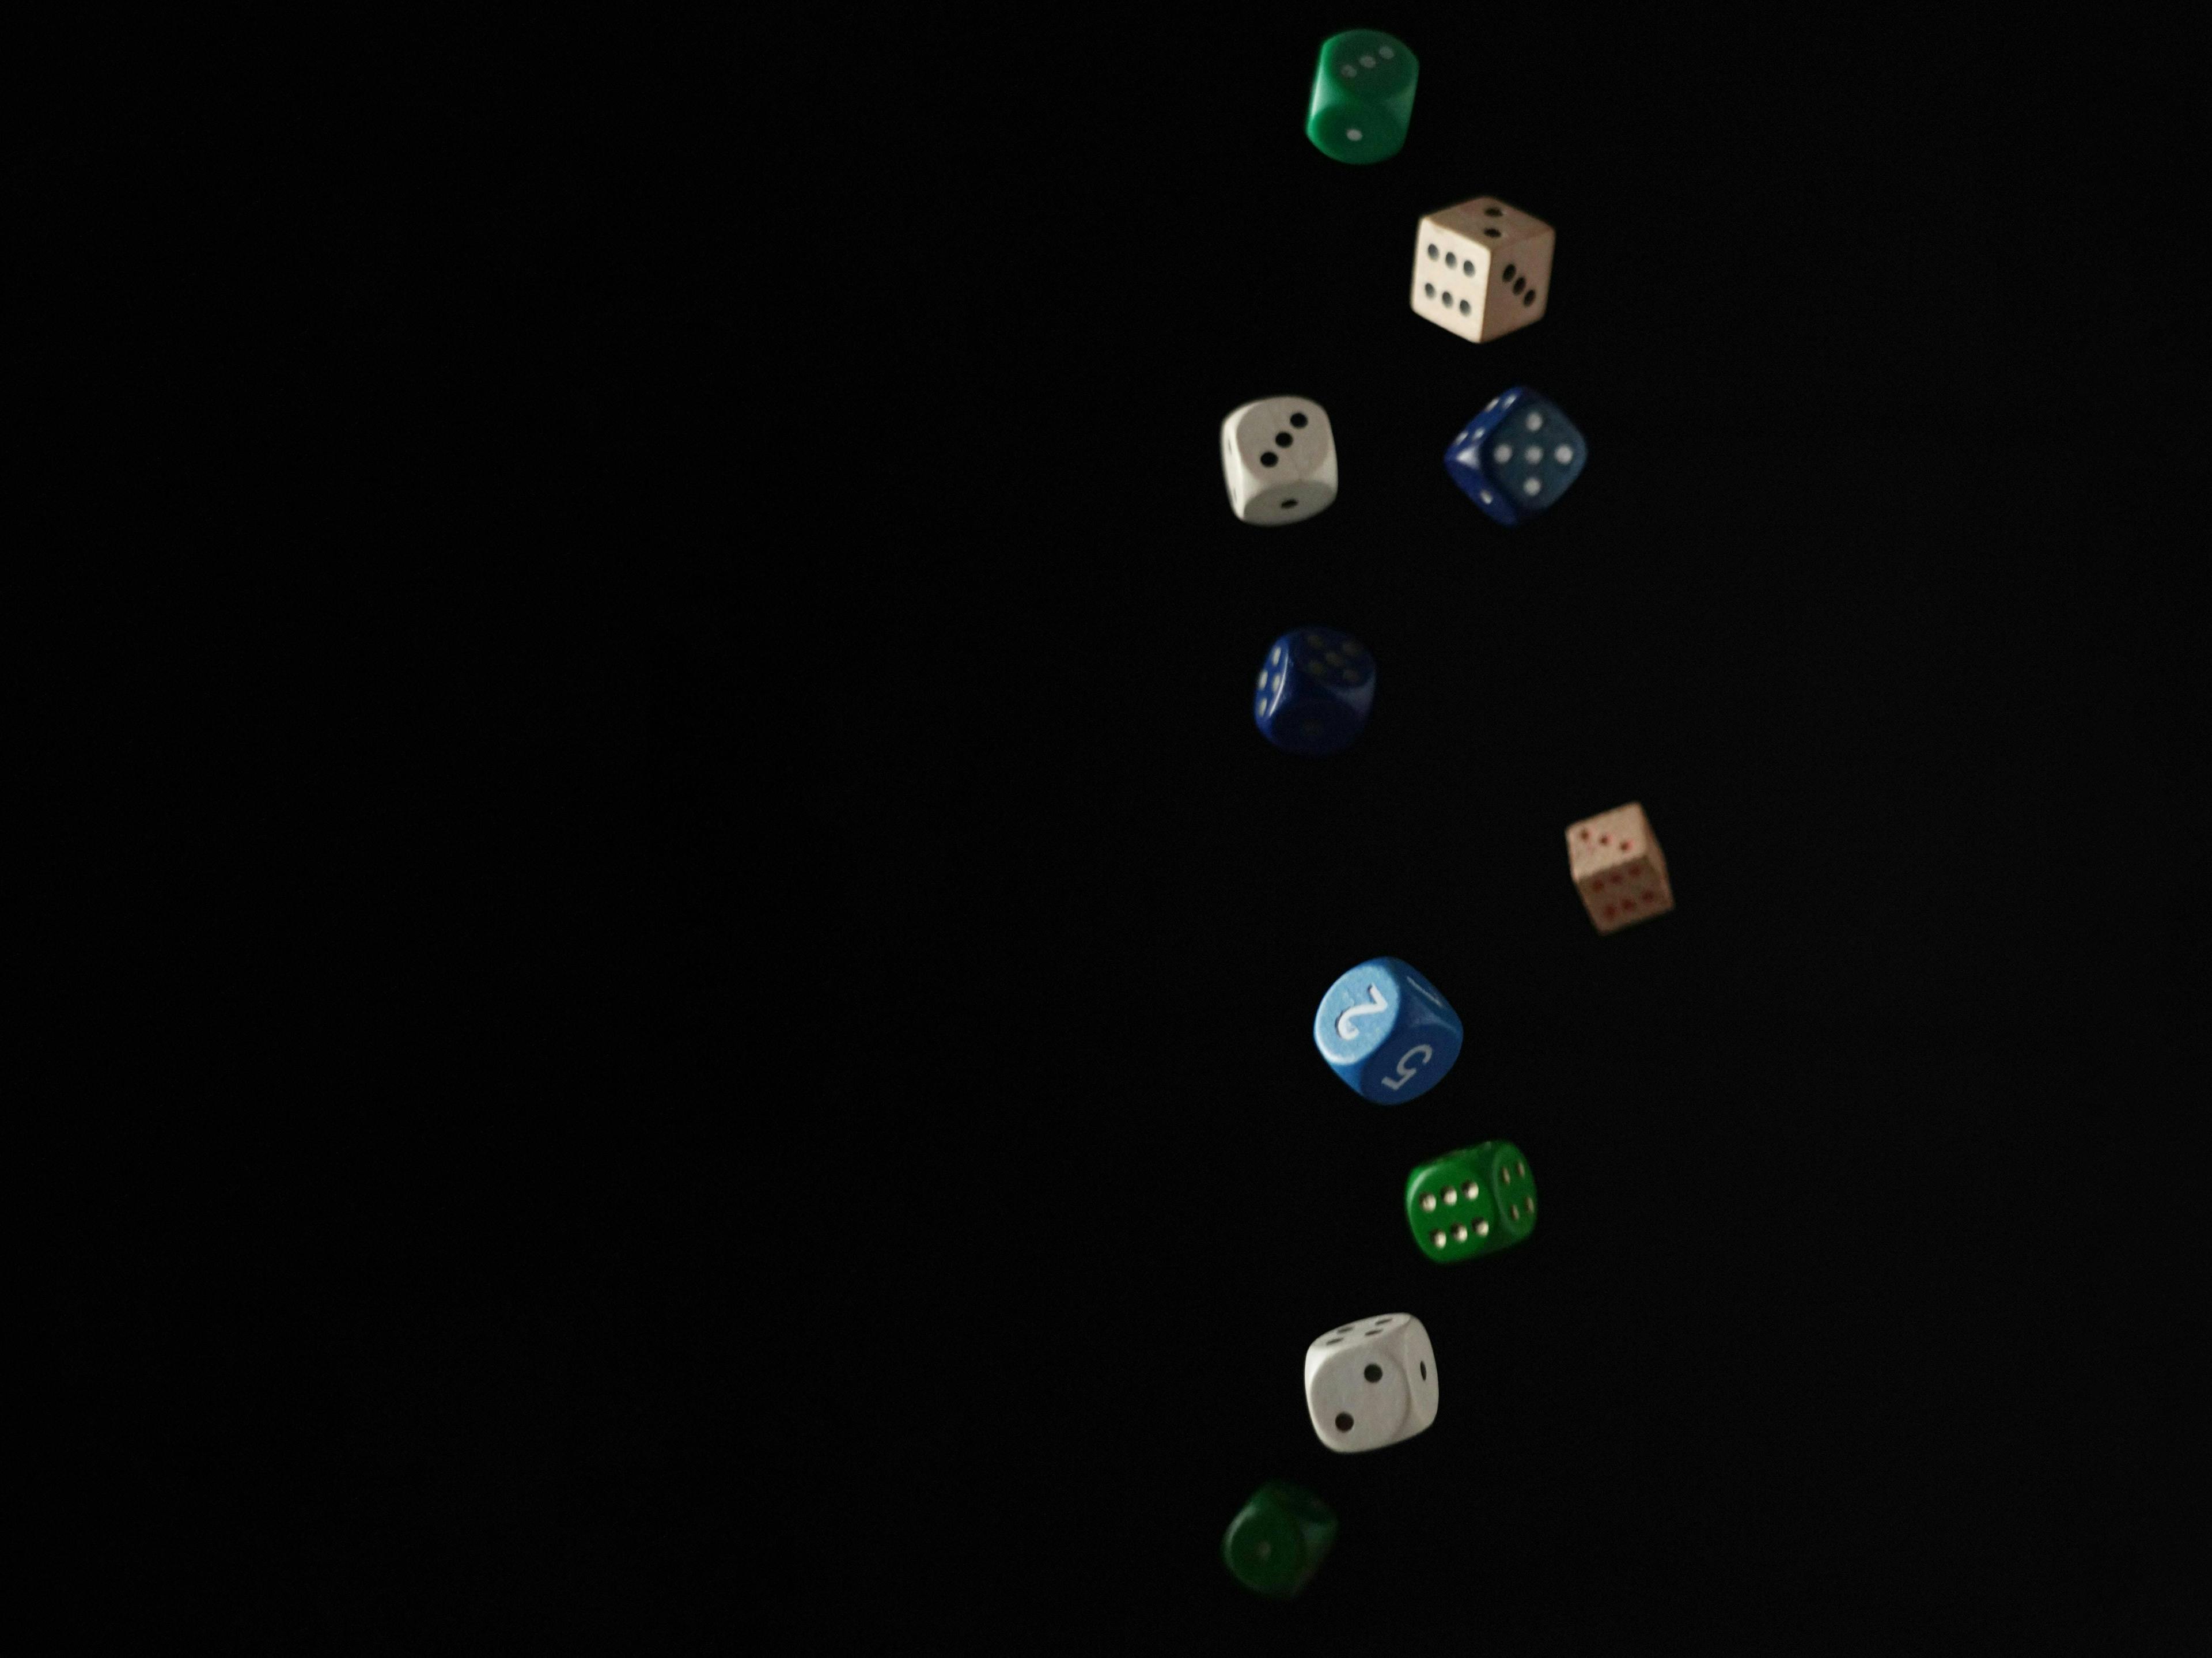 Various colored dice are suspended mid-air against a black background, showing numbers and dots in a seemingly random arrangement.